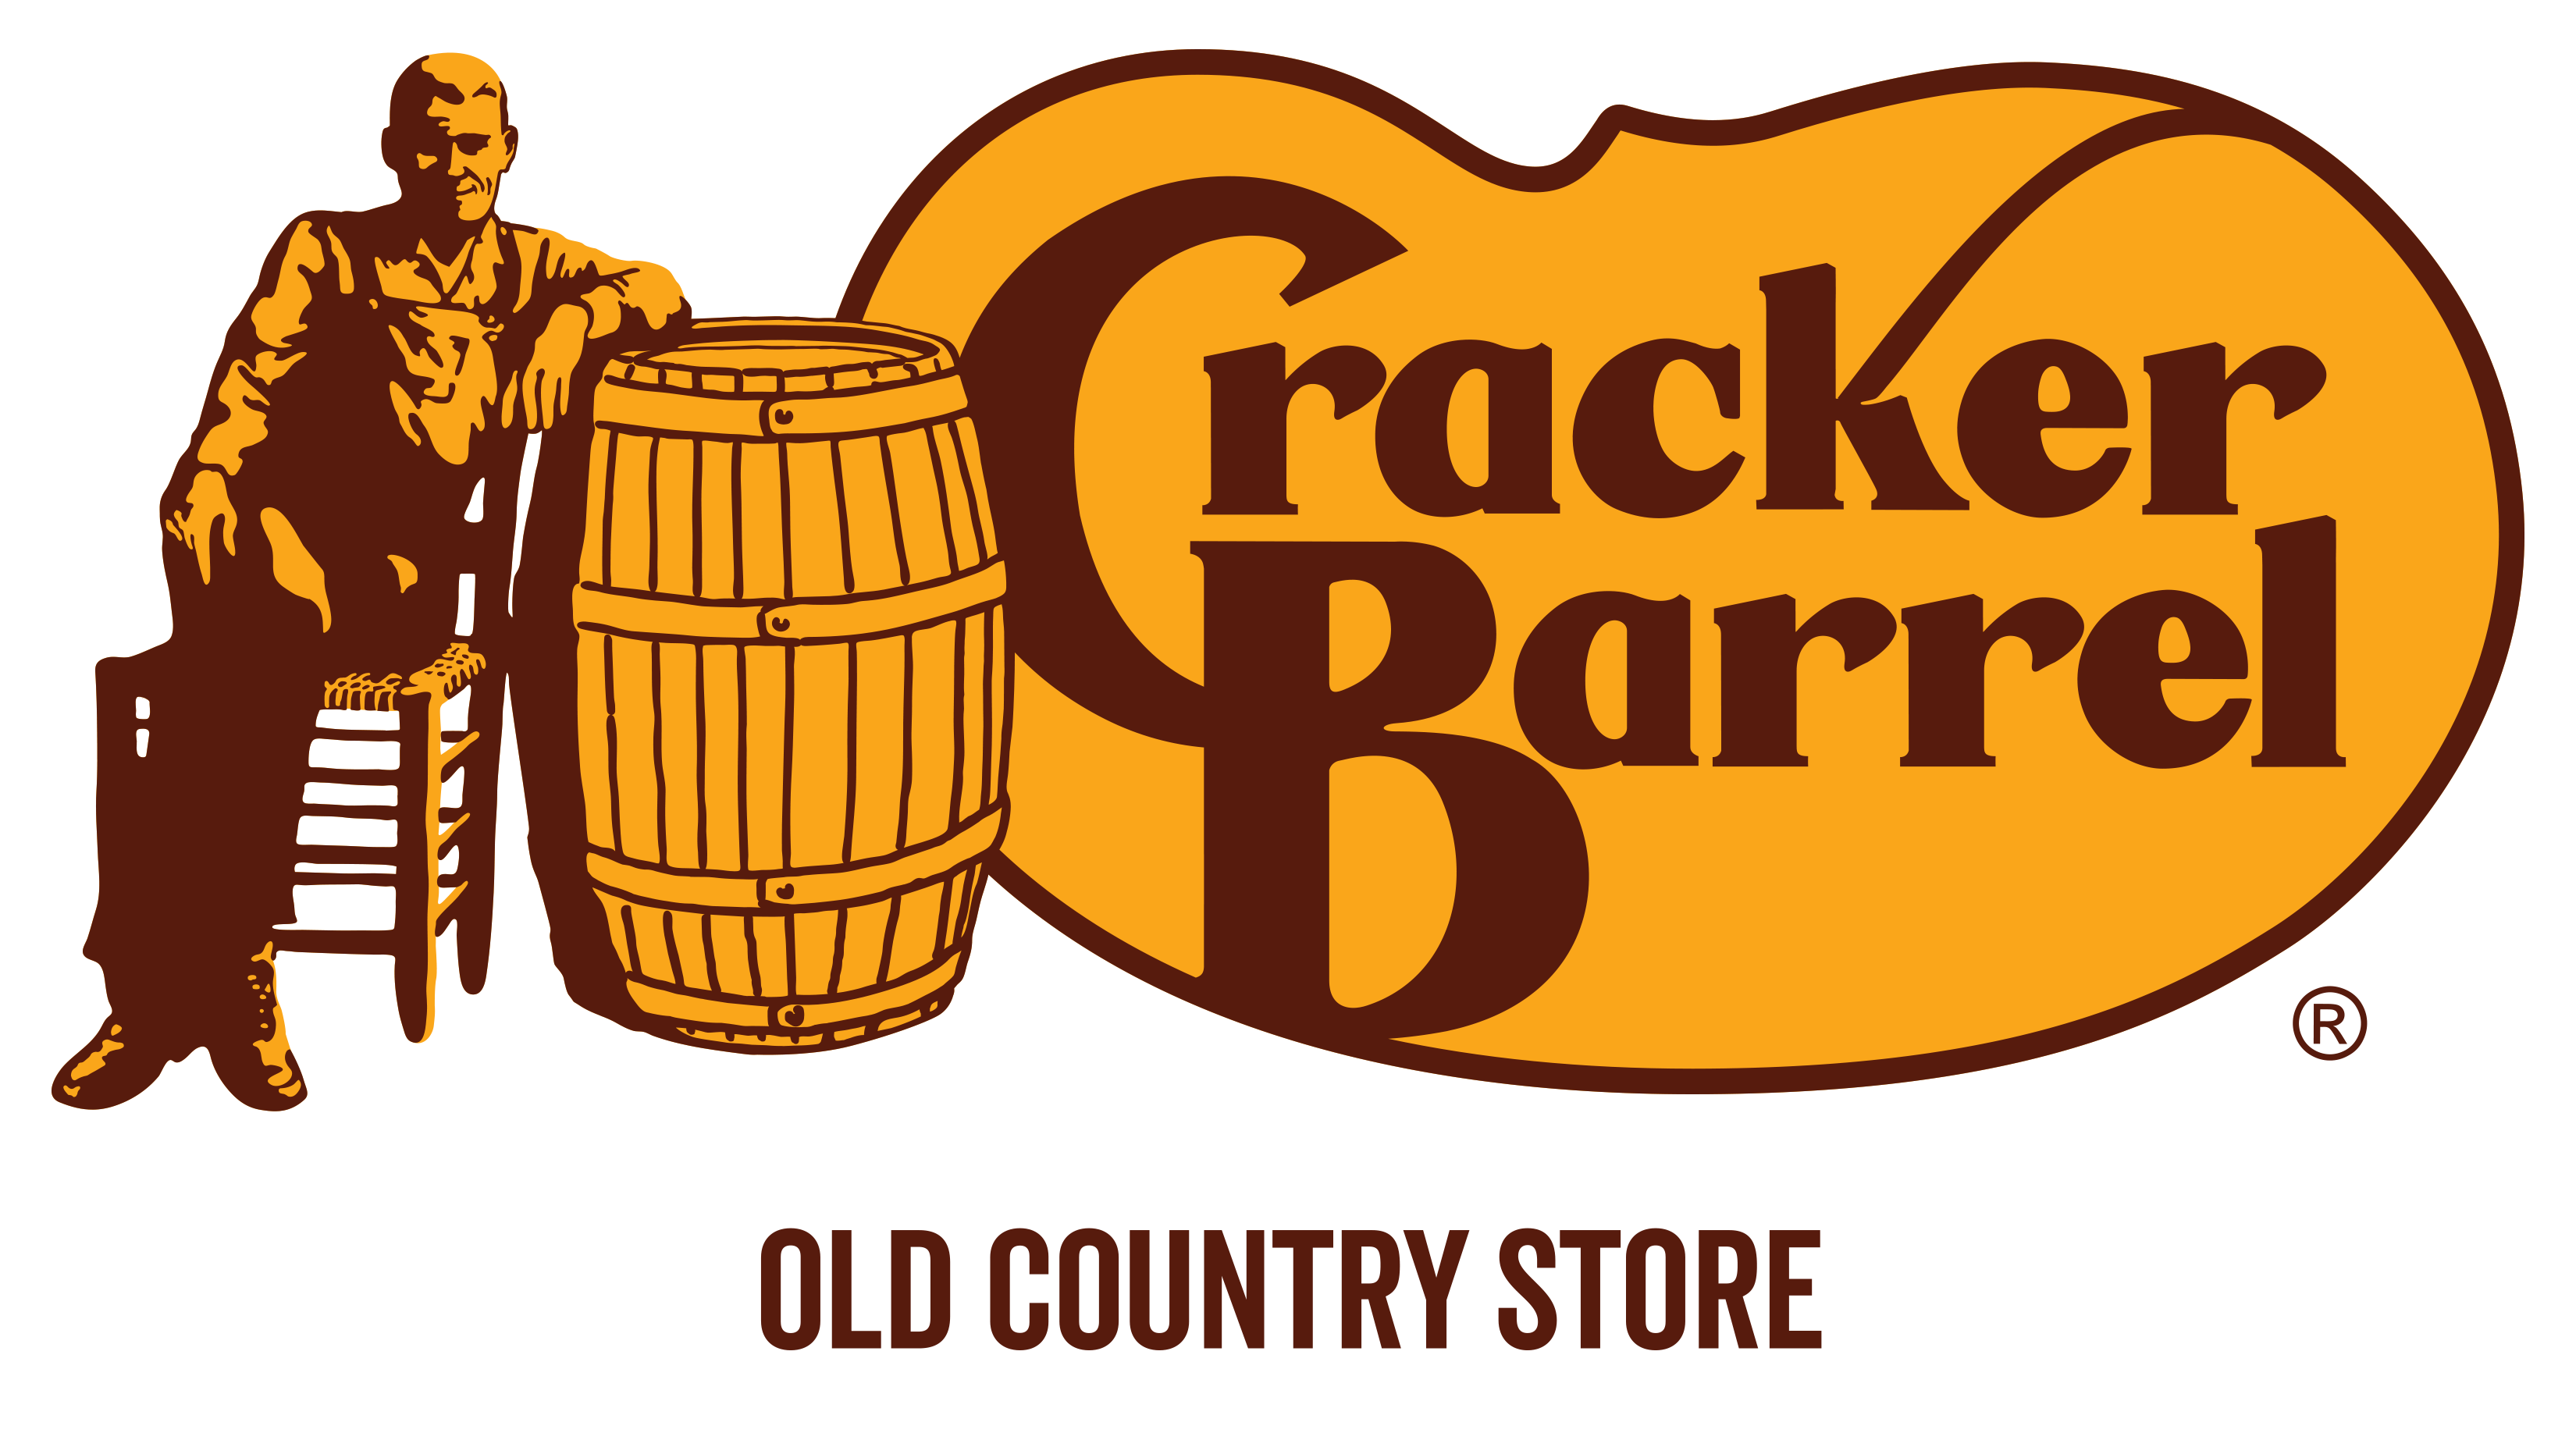 Cracker Barrel | Purchase a meal on your birthday and receive a free dessert and birthday song.